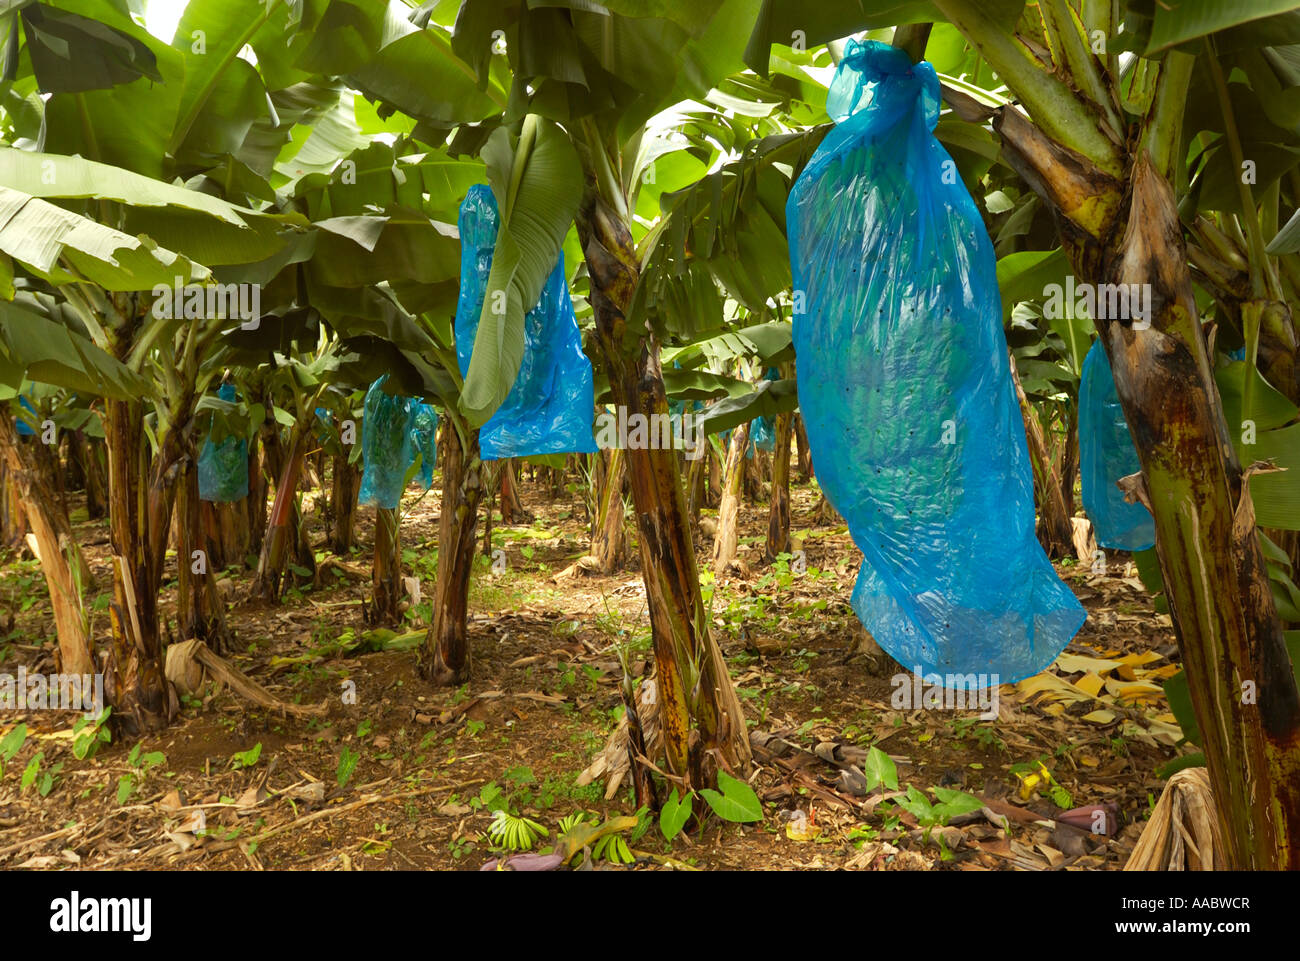 A banana plantation in Basse-Terre, Guadeloupe FR Stock Photo